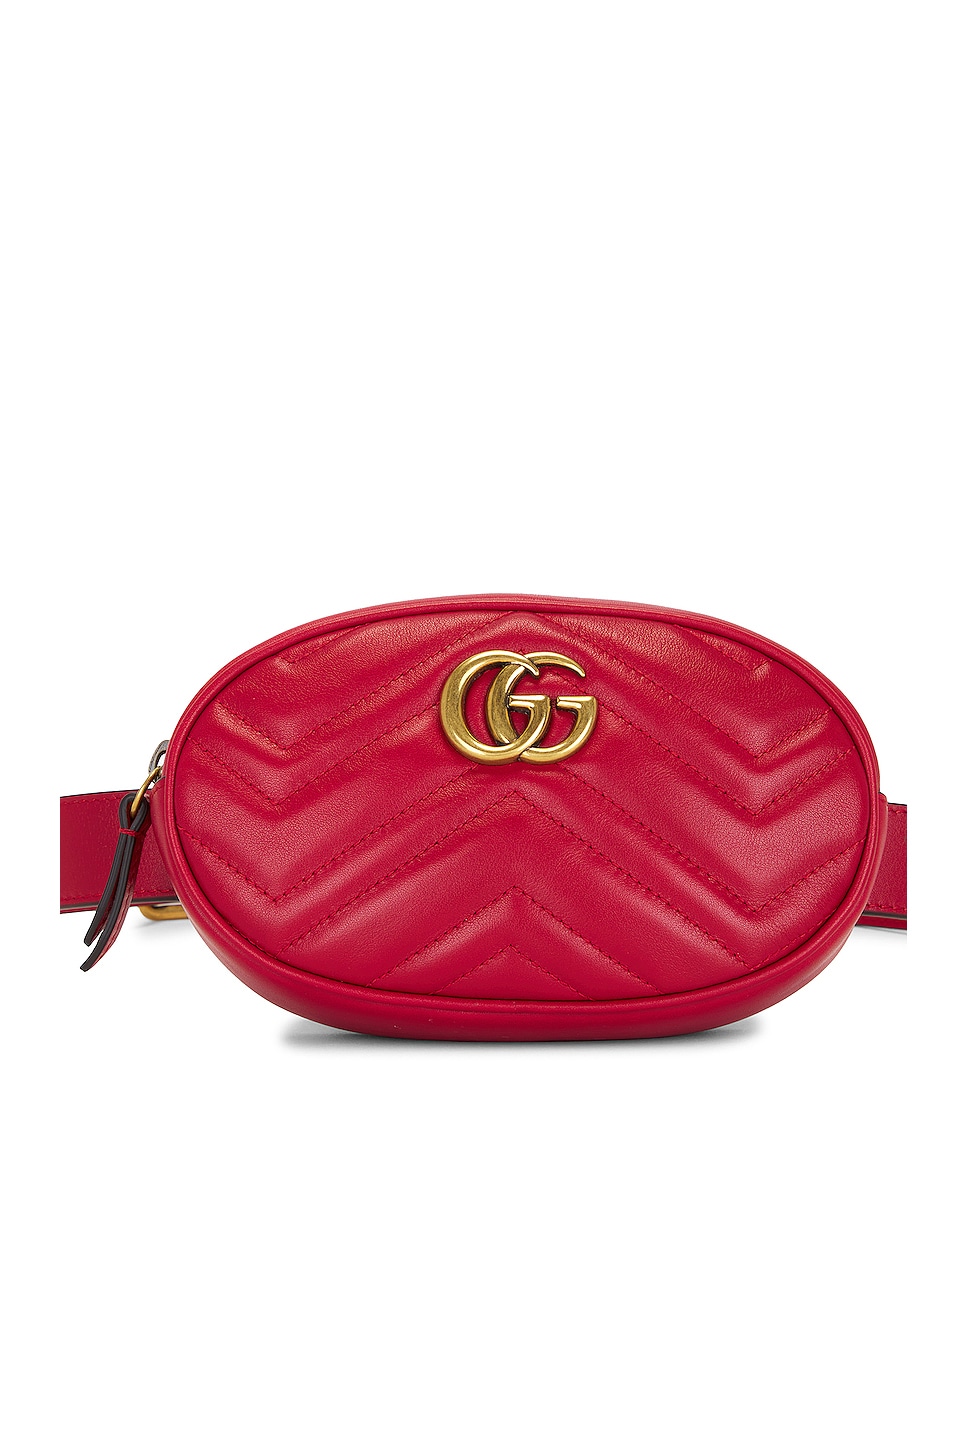 FWRD Renew Gucci GG Marmont Quilted Waist bag in Red | REVOLVE